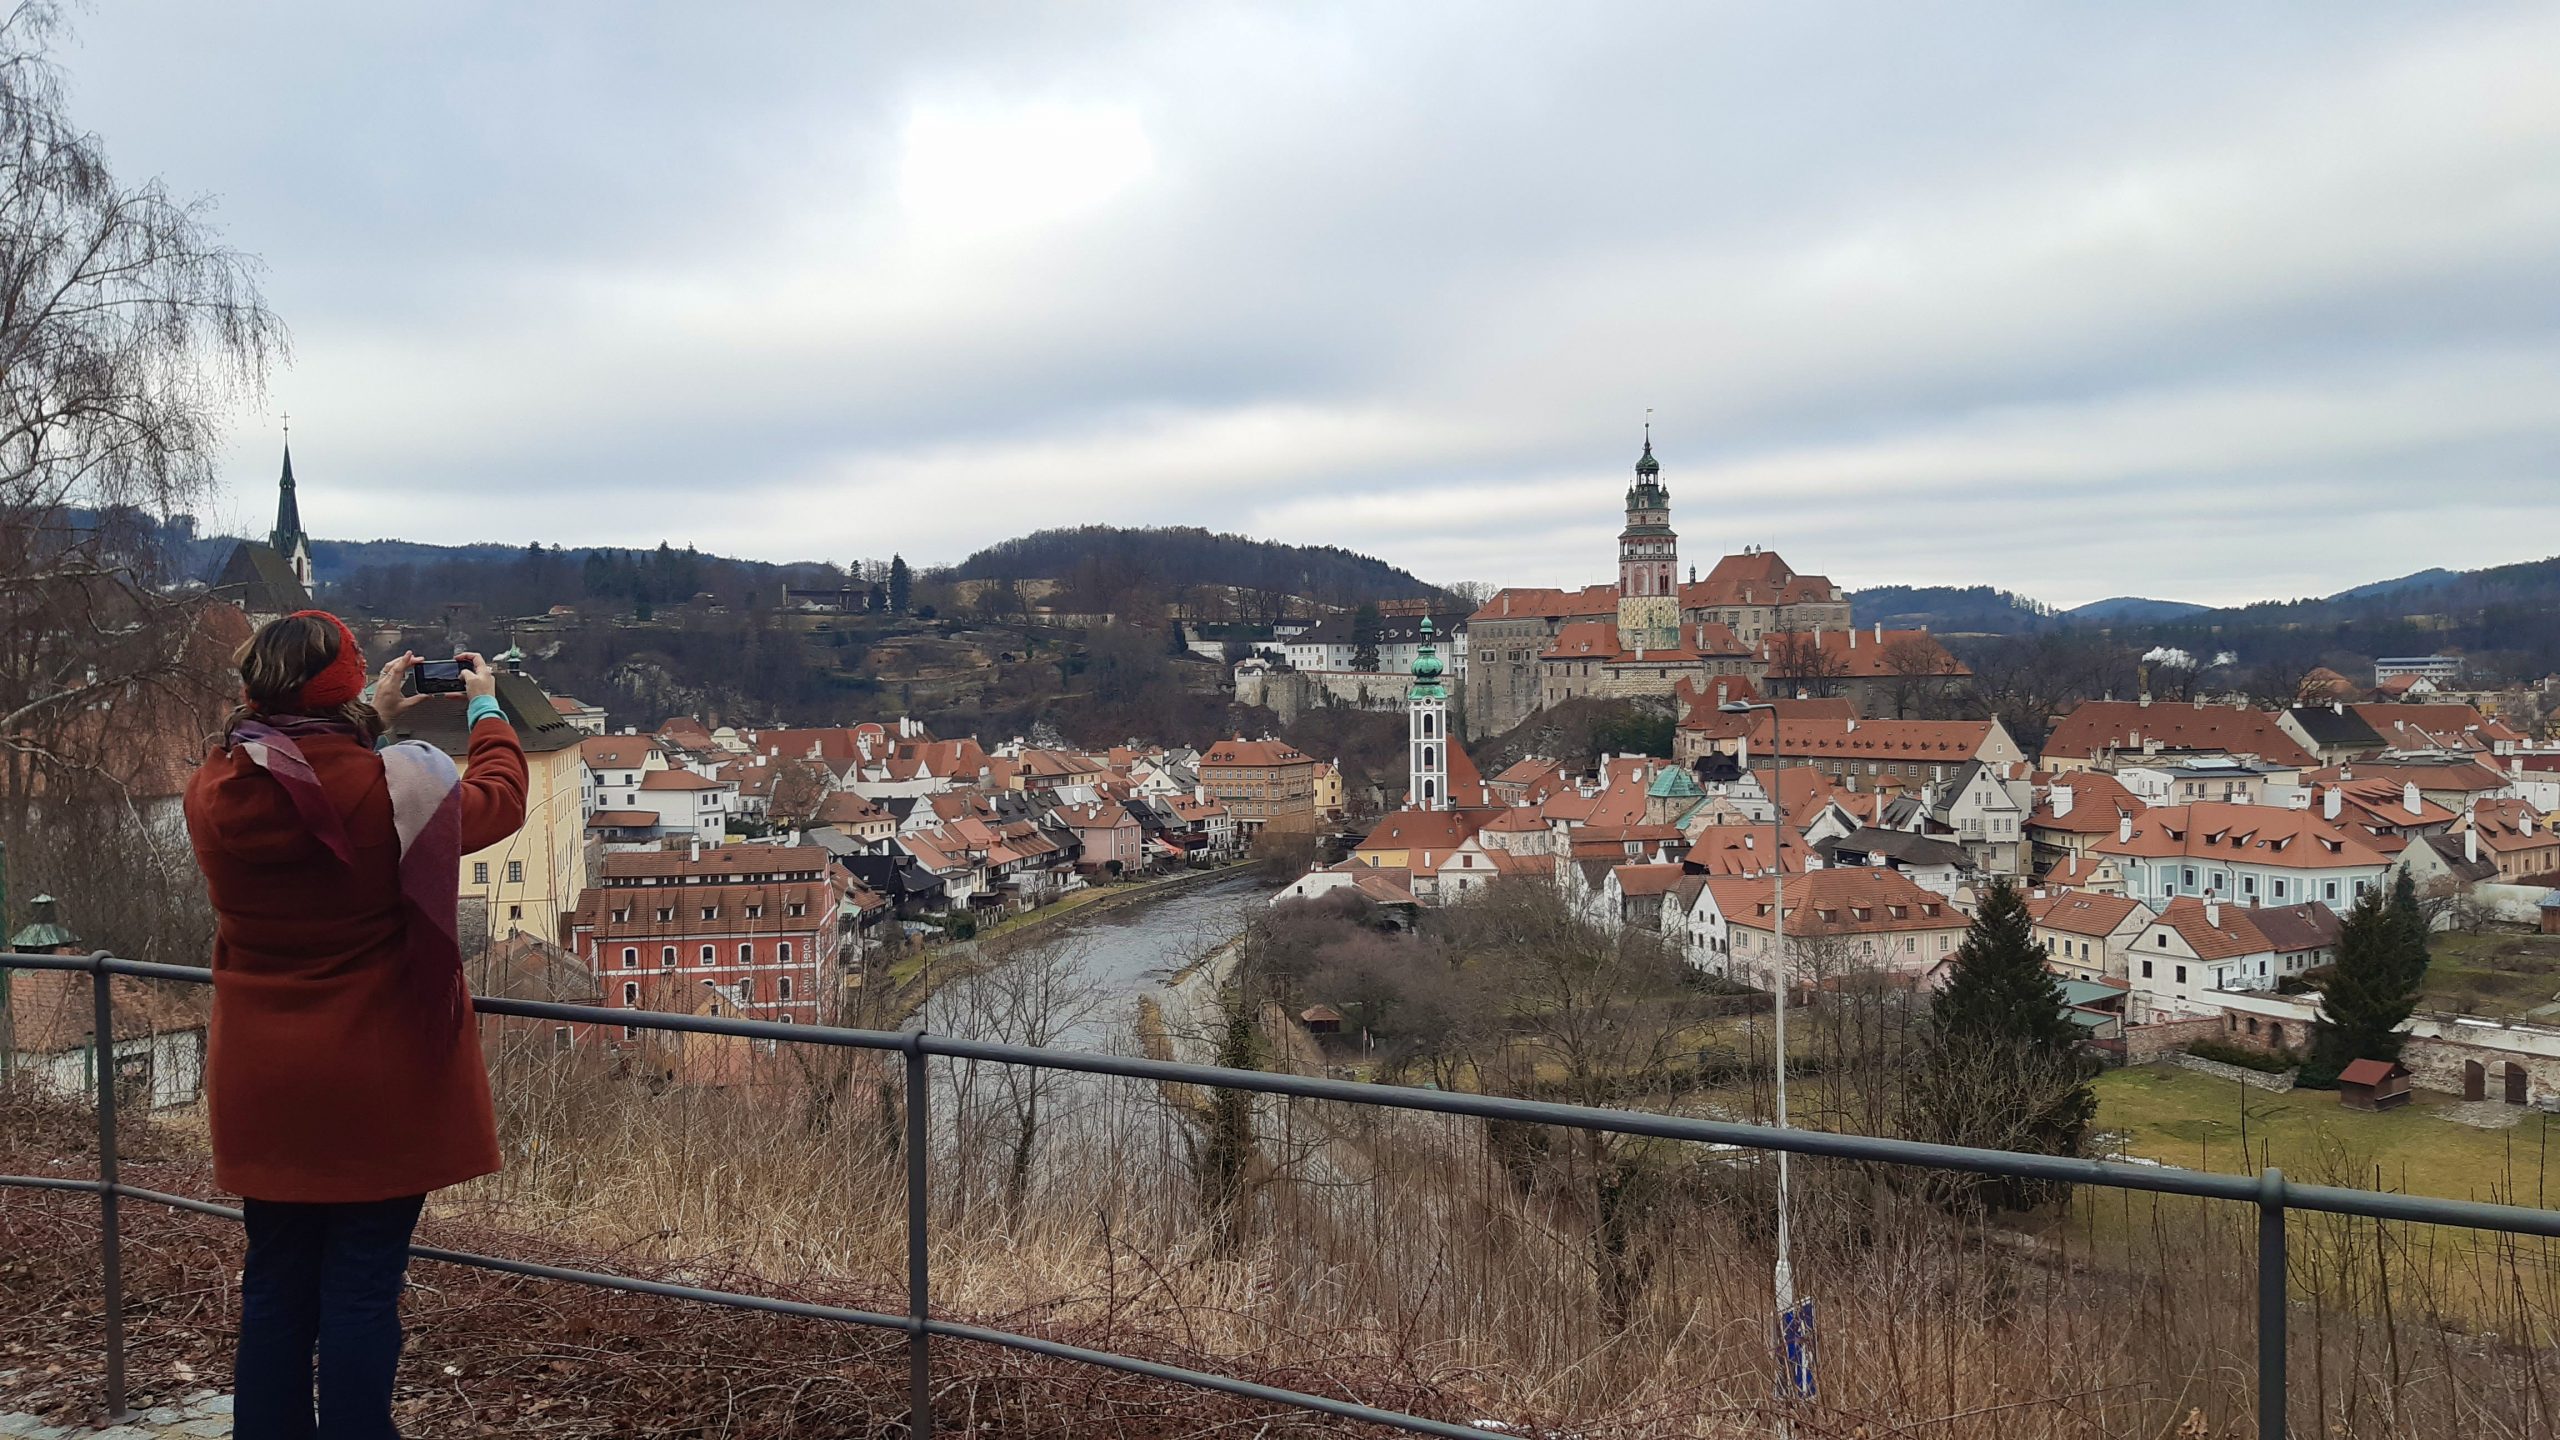 View of Cesky Krumlov from our tour